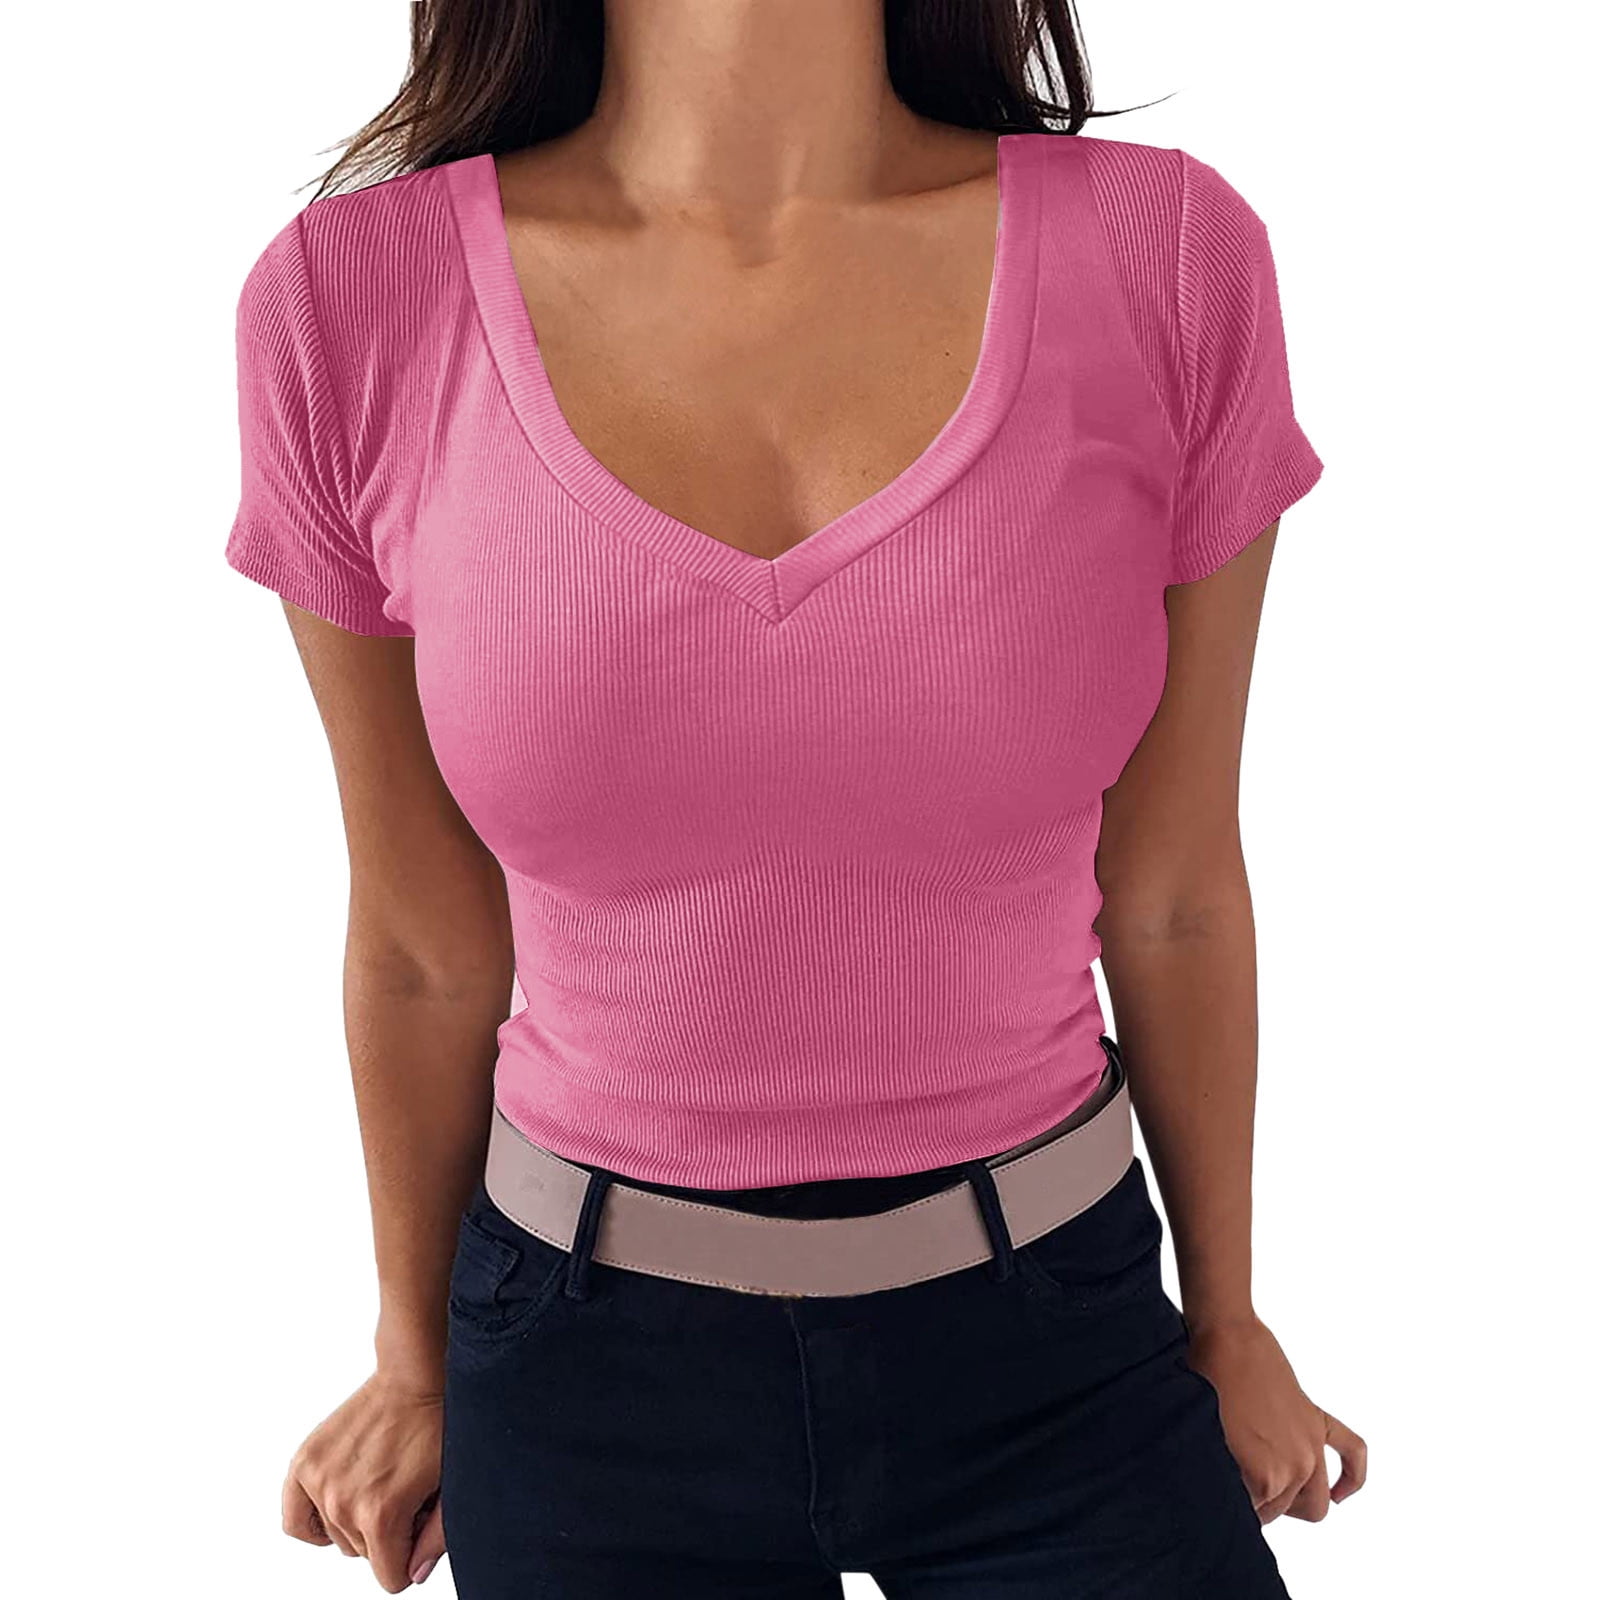 Outfmvch long sleeve shirts for women Tee Shirt Ribbed Fitted Tight Short  Sleeve Shirt Basic Knit womens tops Hot Pink